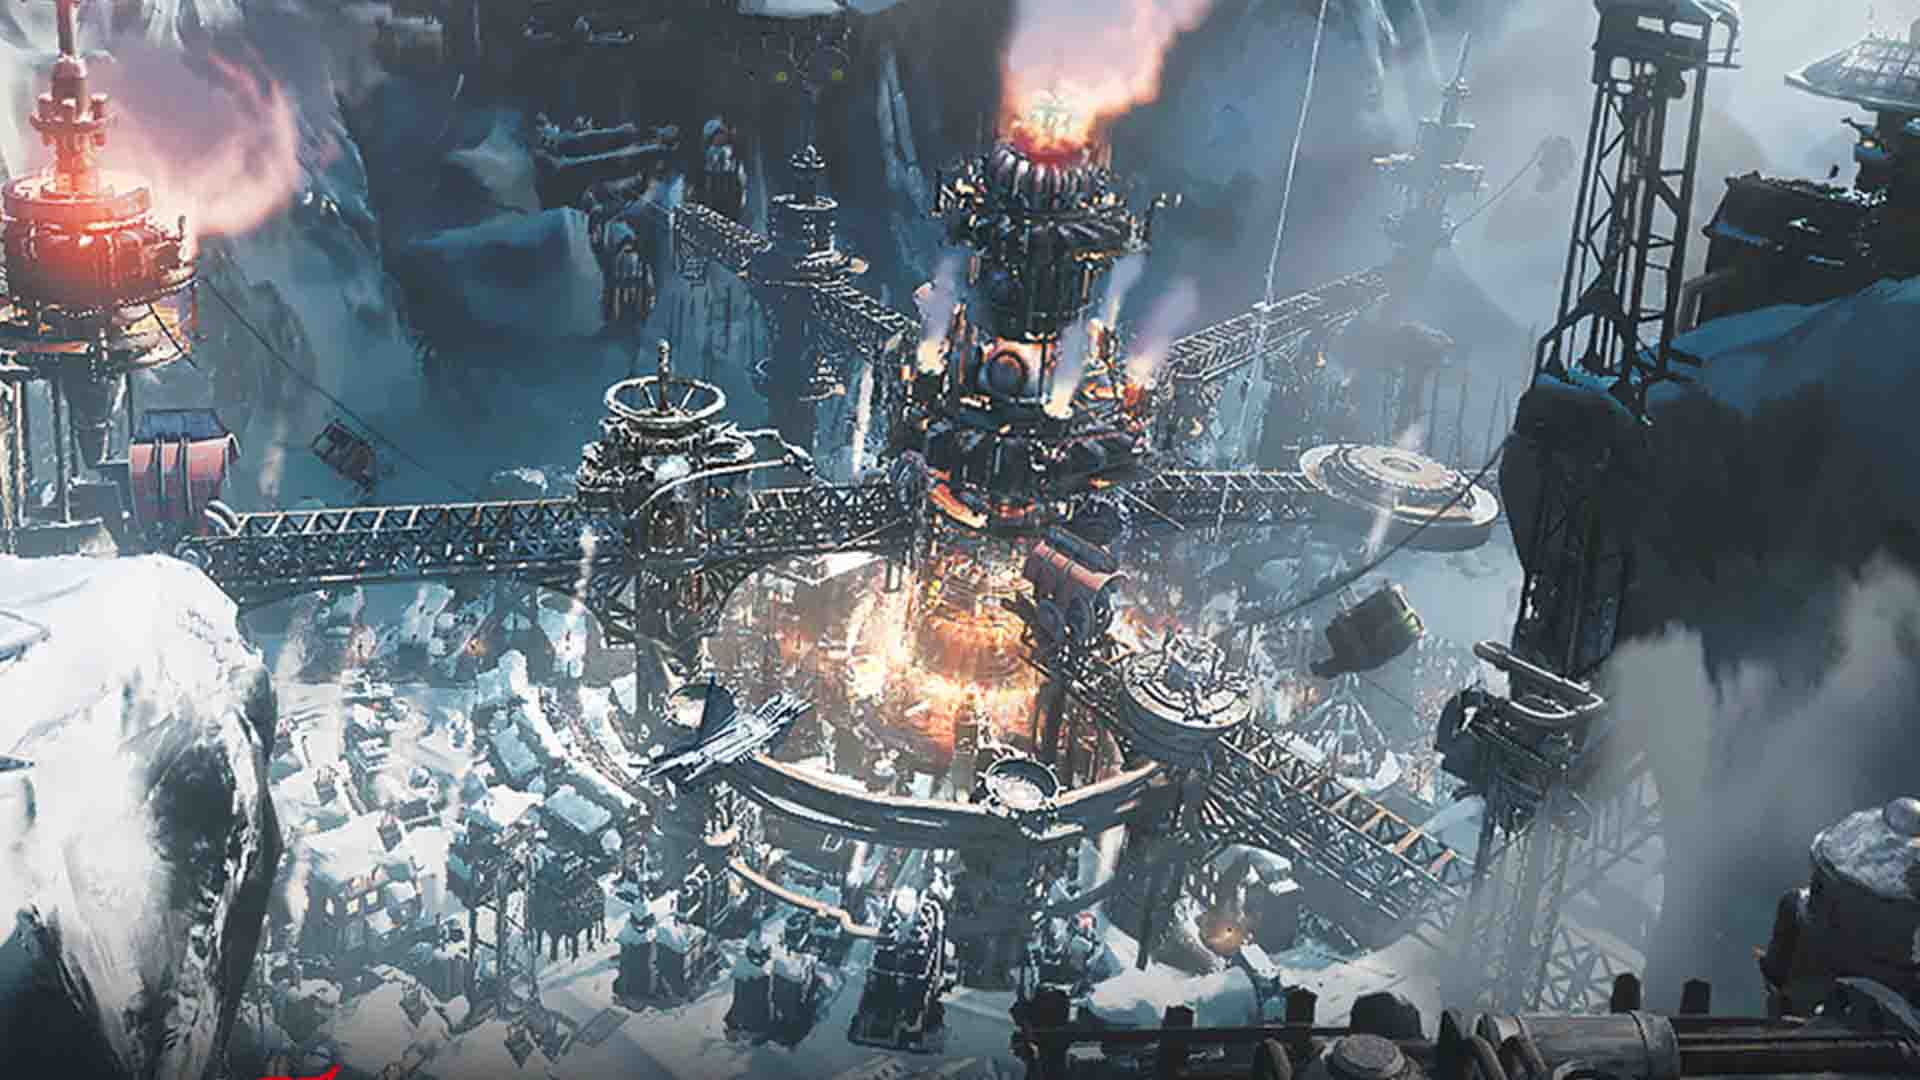 Frostpunk: Beyond the Ice early access registration is now open